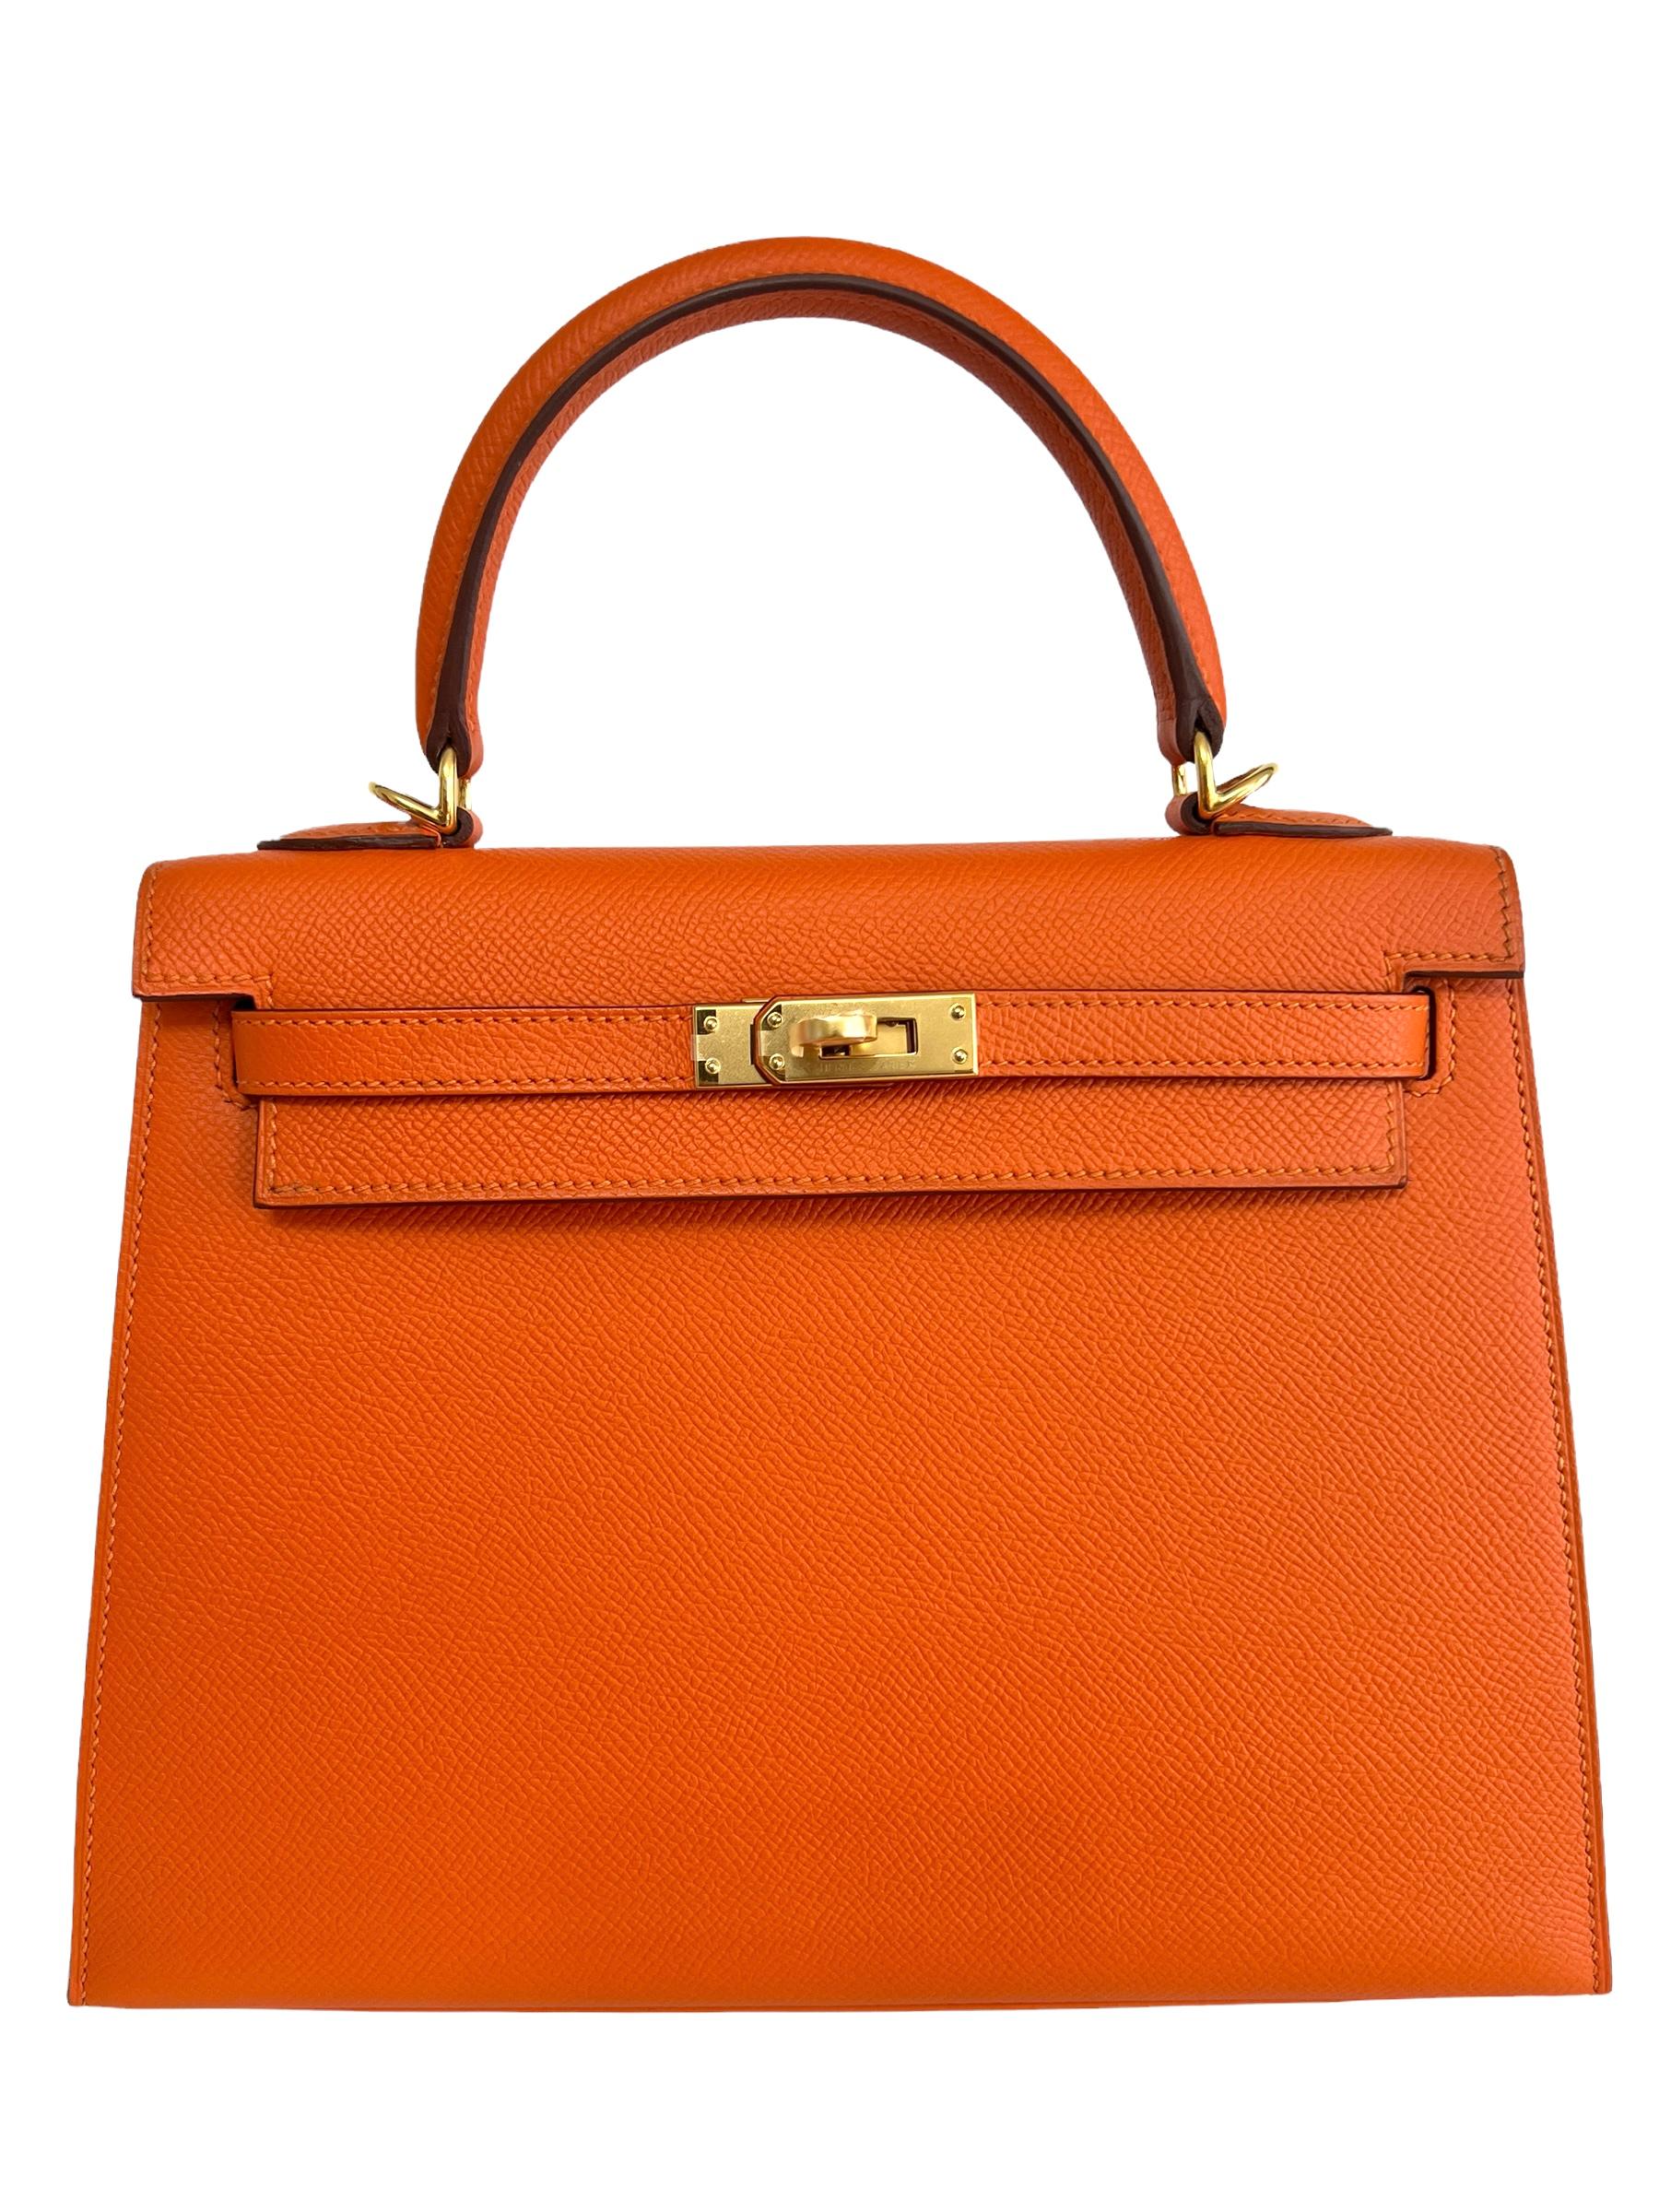 Beautiful Hermes Kelly 25 Sellier Orange Epsom Leather. Complimented by Gold Hardware. Pristine Almost Like New with Plastic on all Hardware and feet. 2015 T Stamp. 

Shop with Confidence from Lux. Addicts. Authenticity Guaranteed! 
